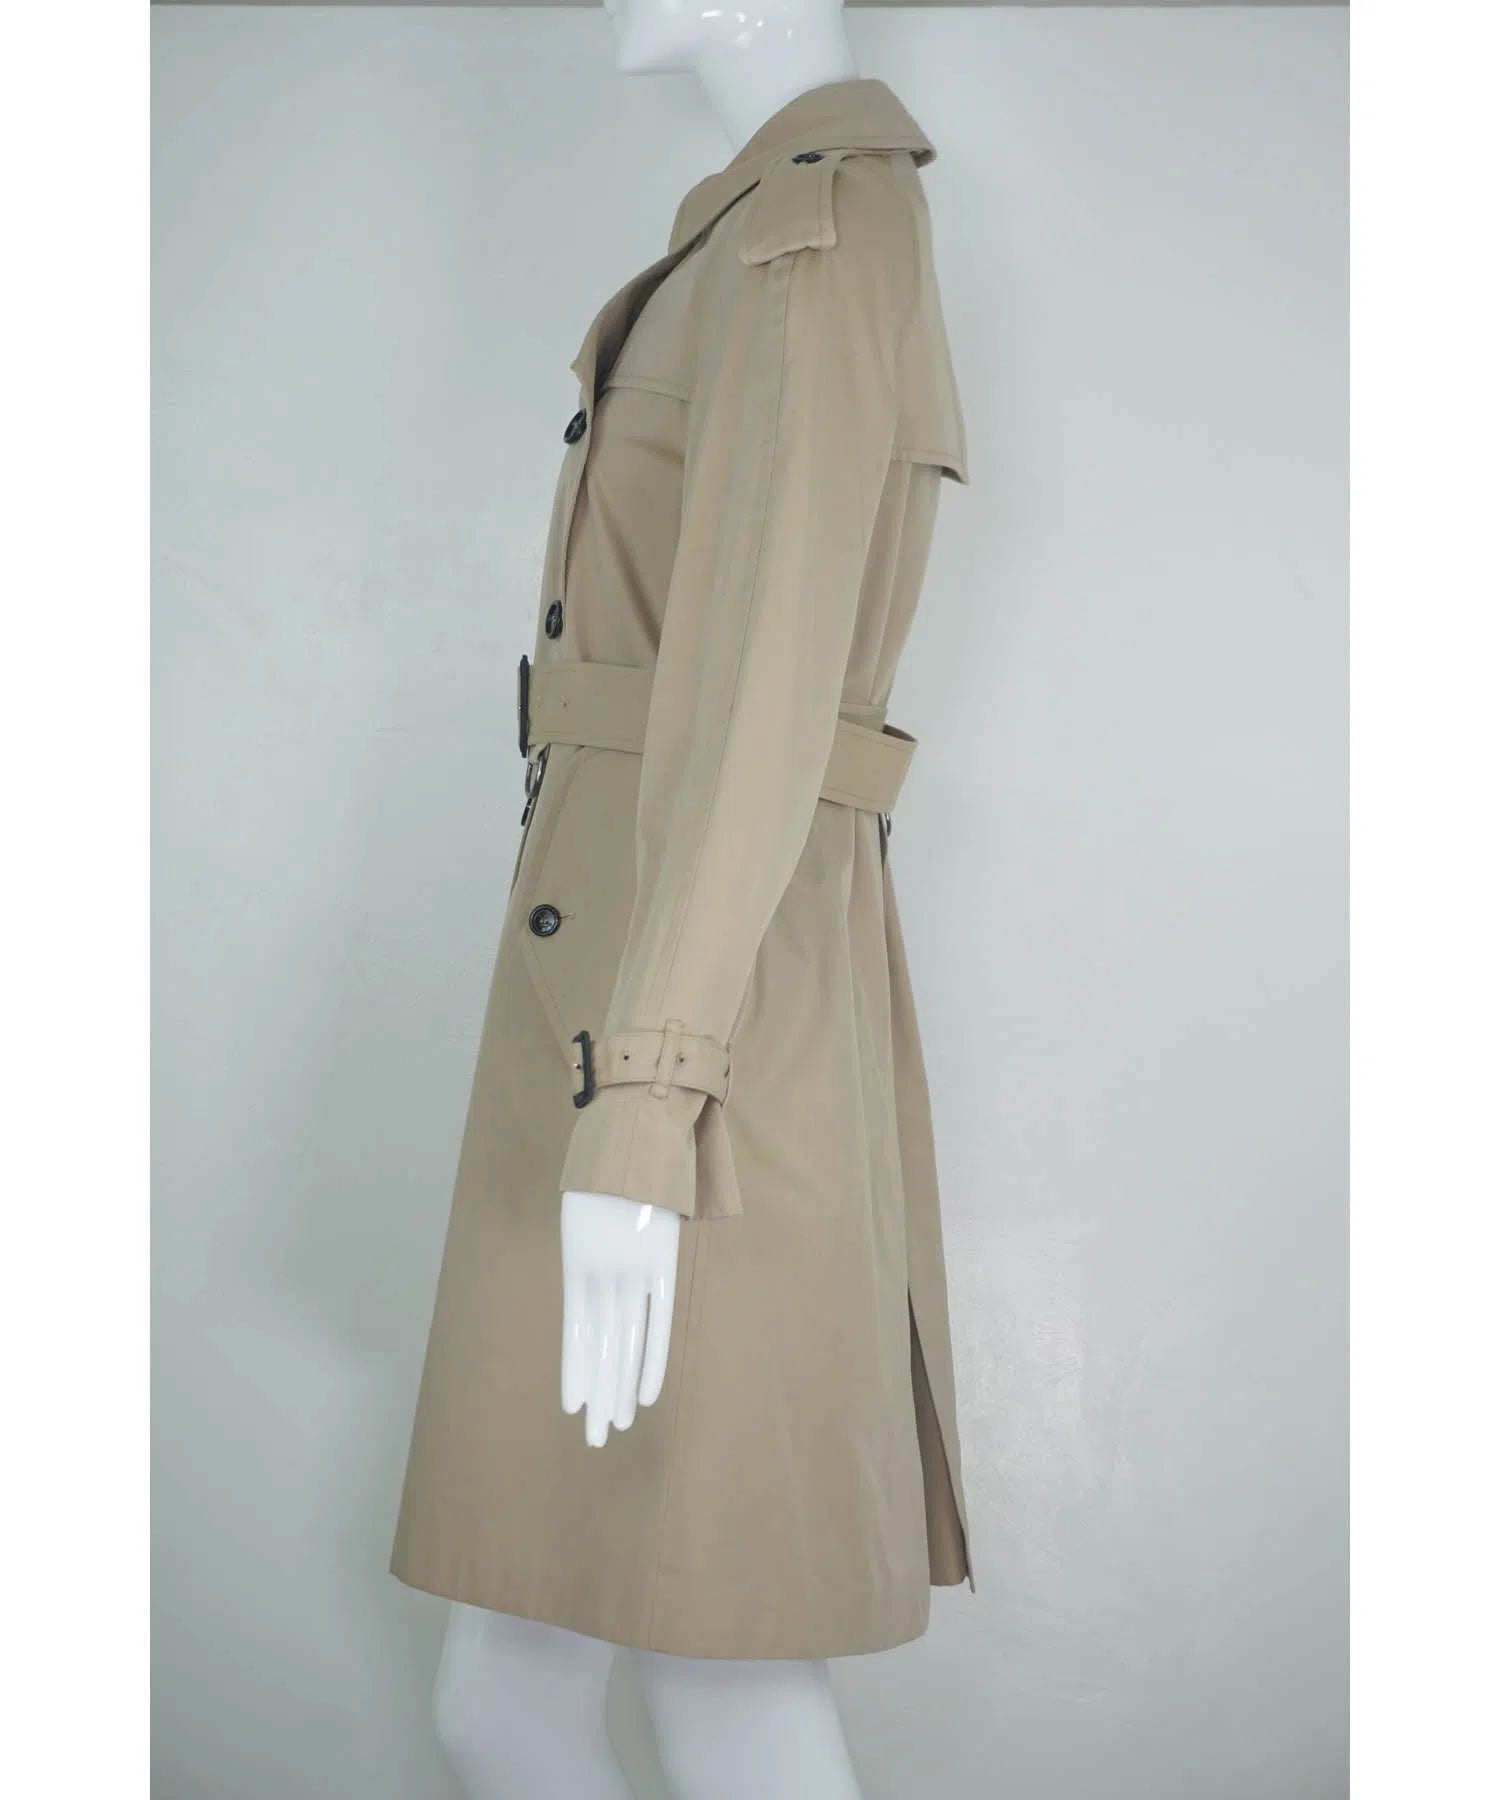 Burberry London Classic Belted Trench Coat Size 6